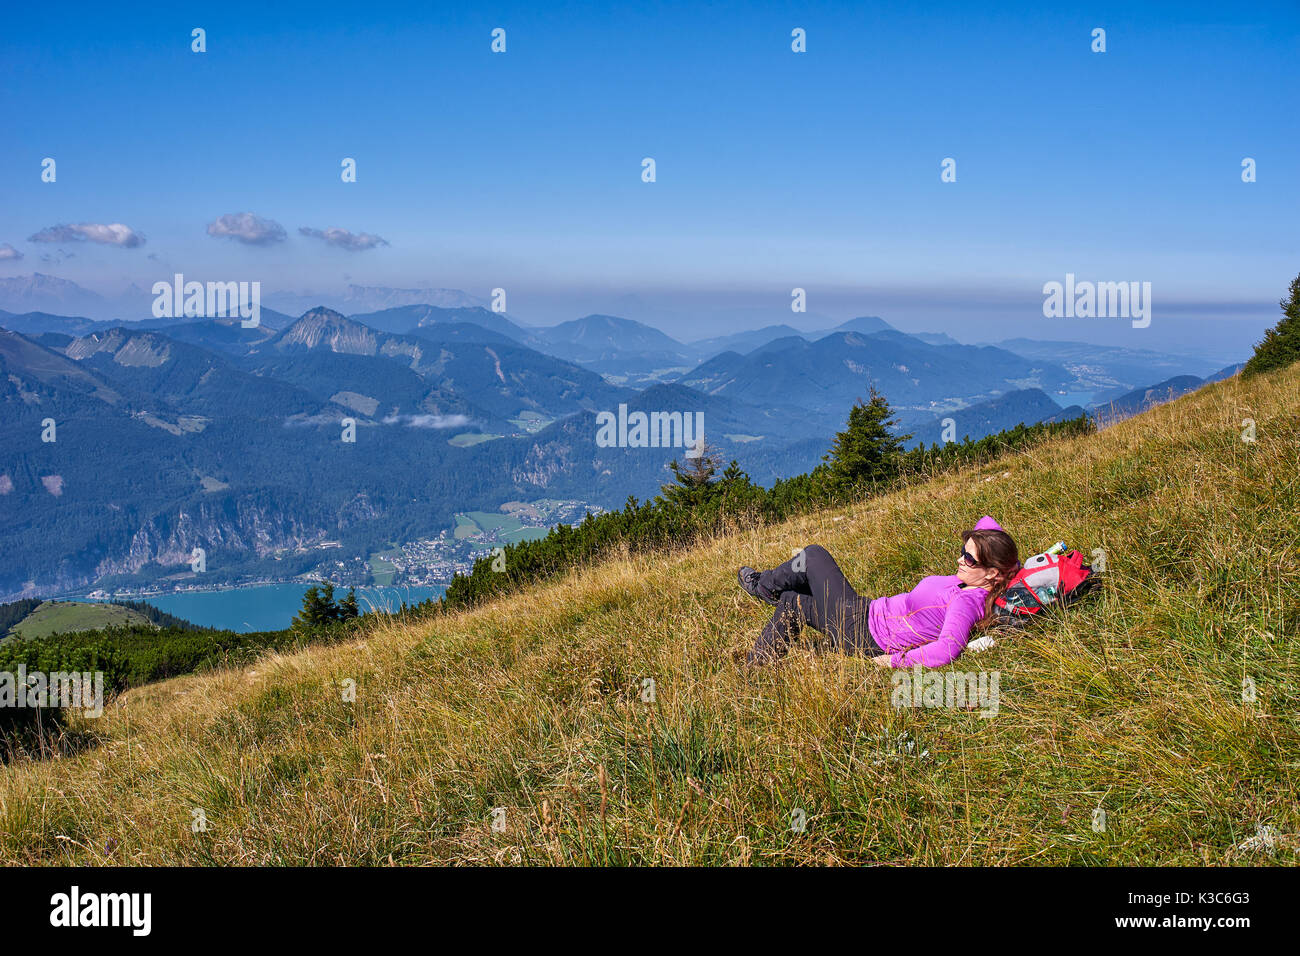 Woman with backpack in mountains Stock Photo